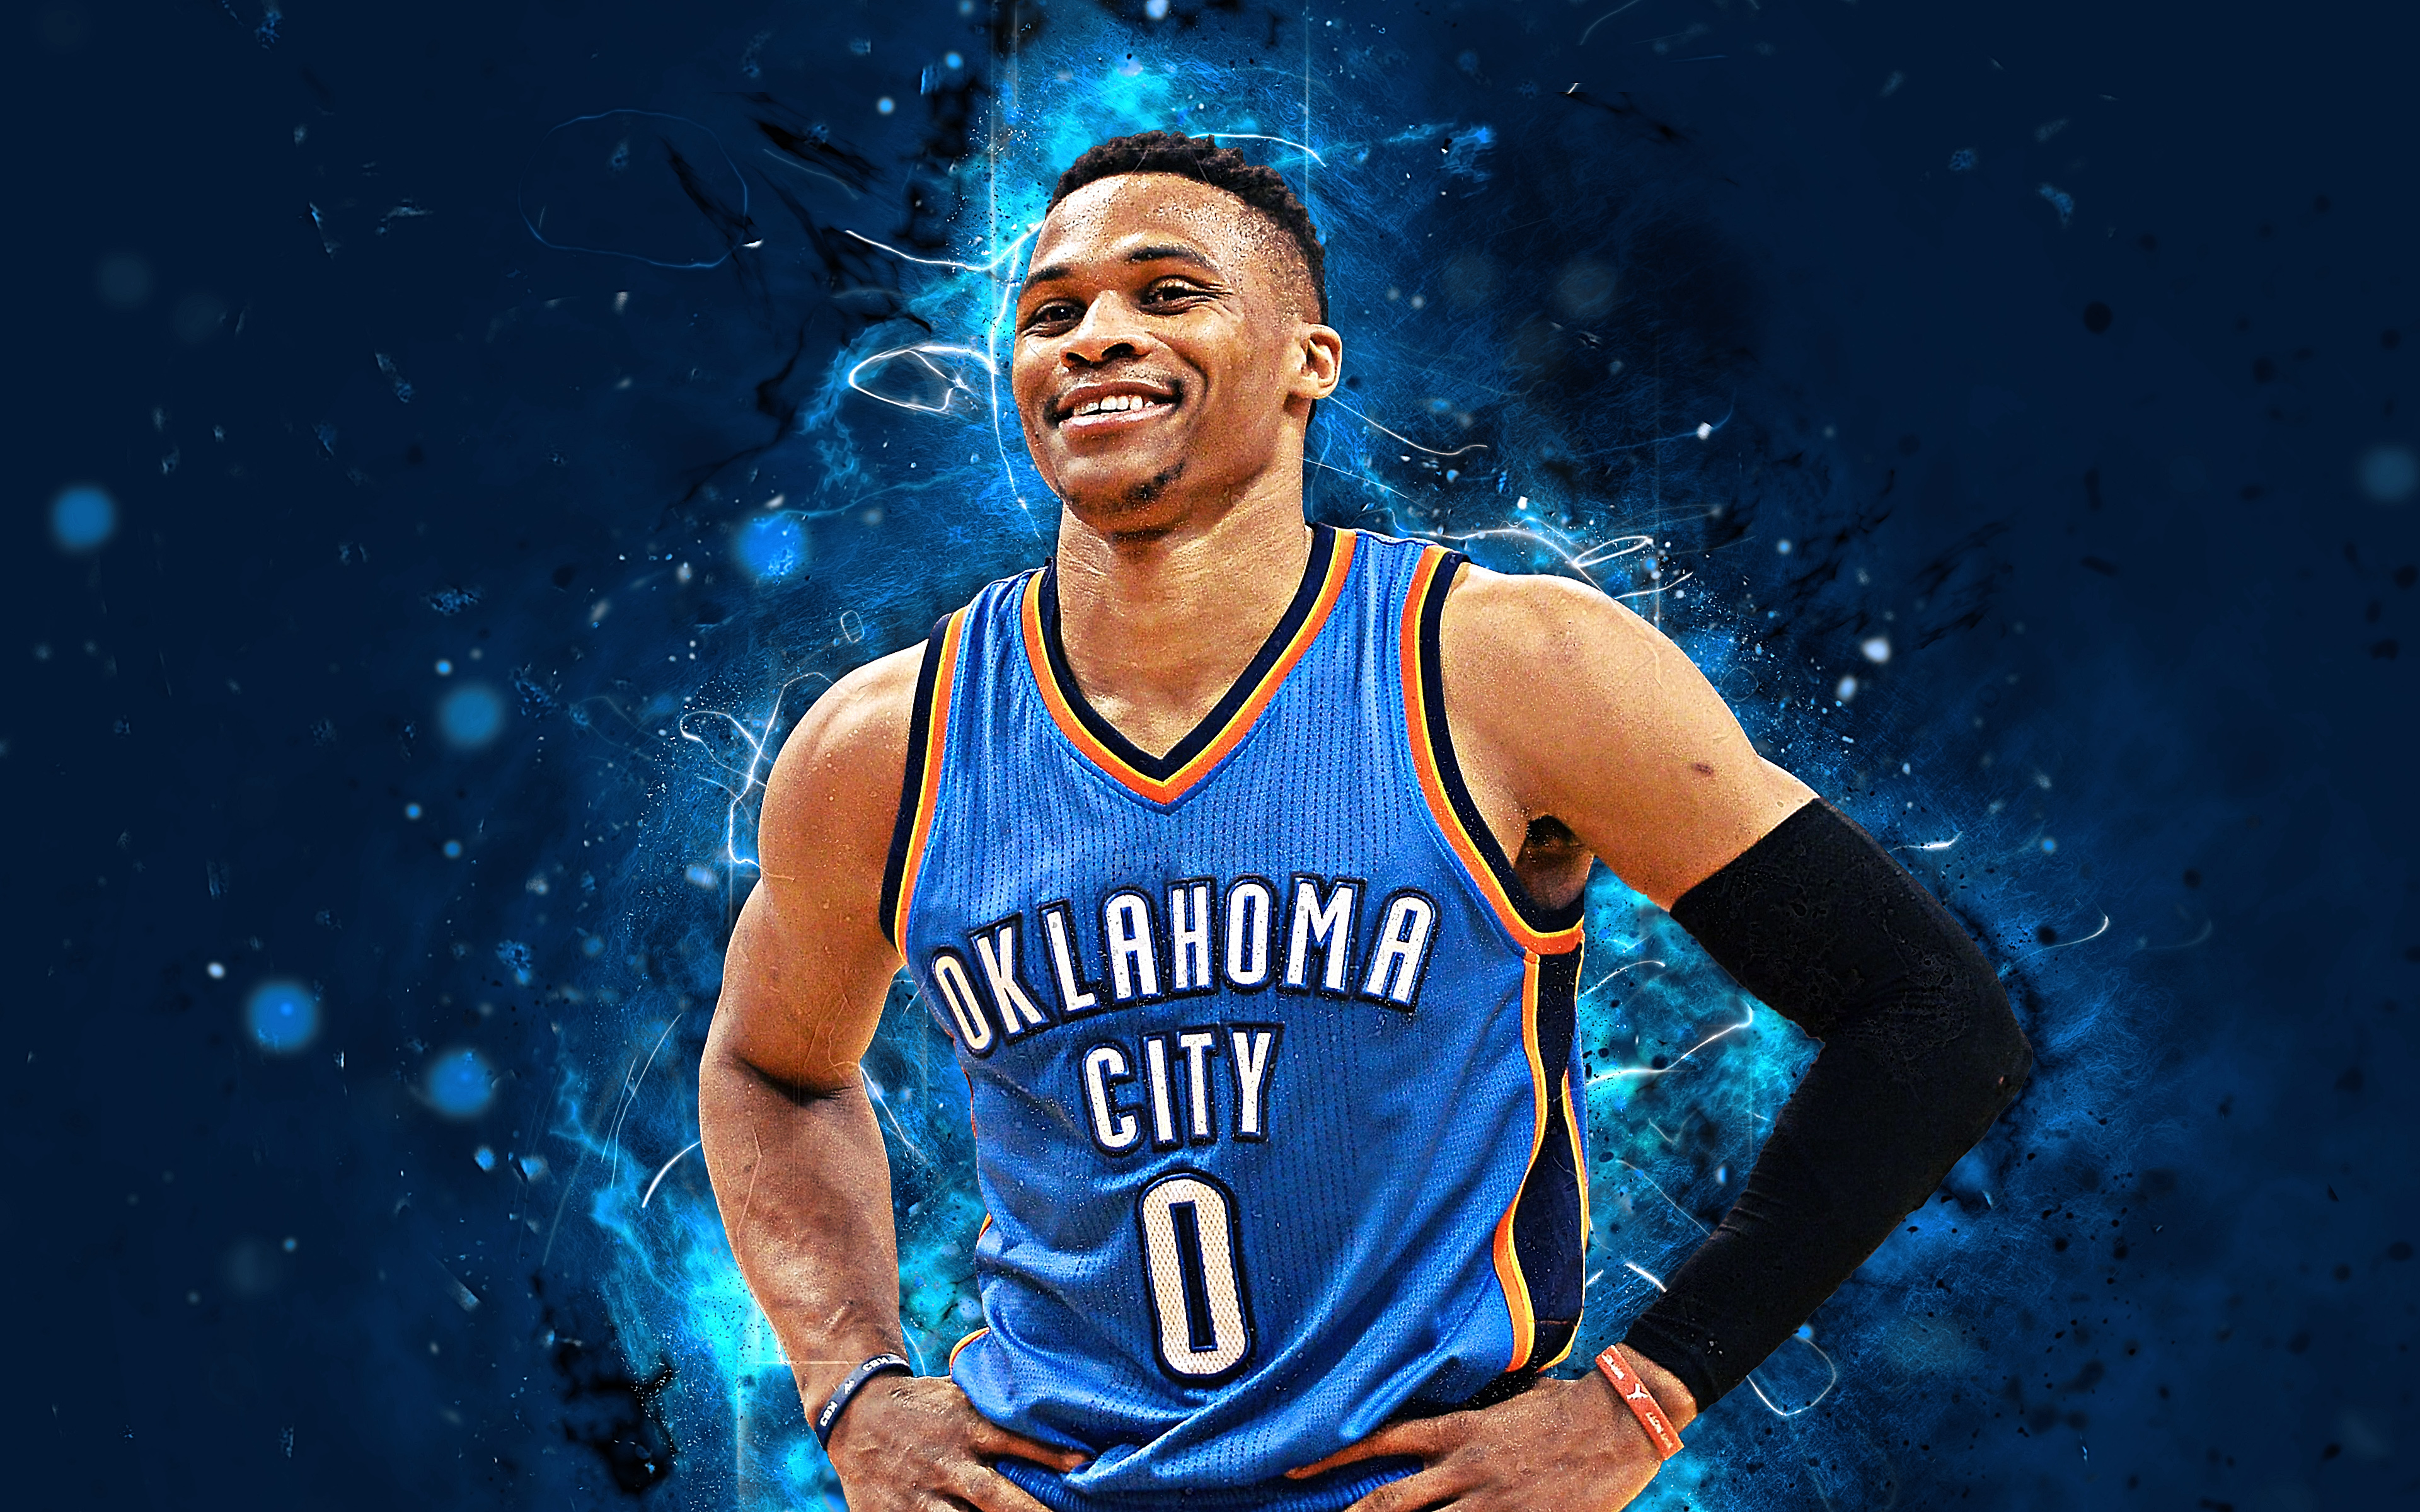 Russell Westbrook Wallpapers | Basketball Wallpapers at BasketWallpapers.com